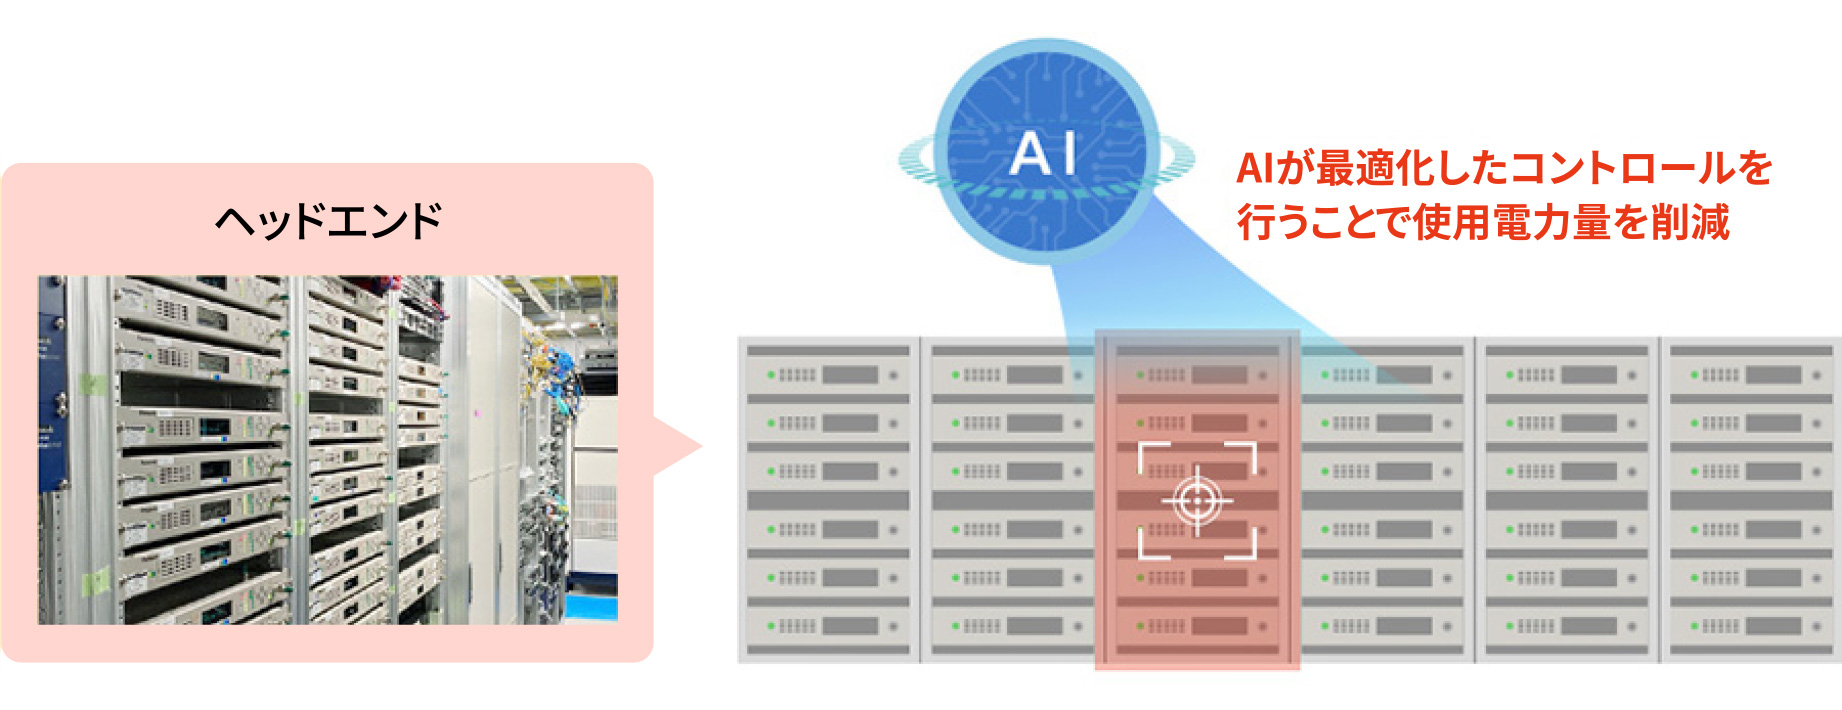 AI optimizes and controls faults to reduce power consumption